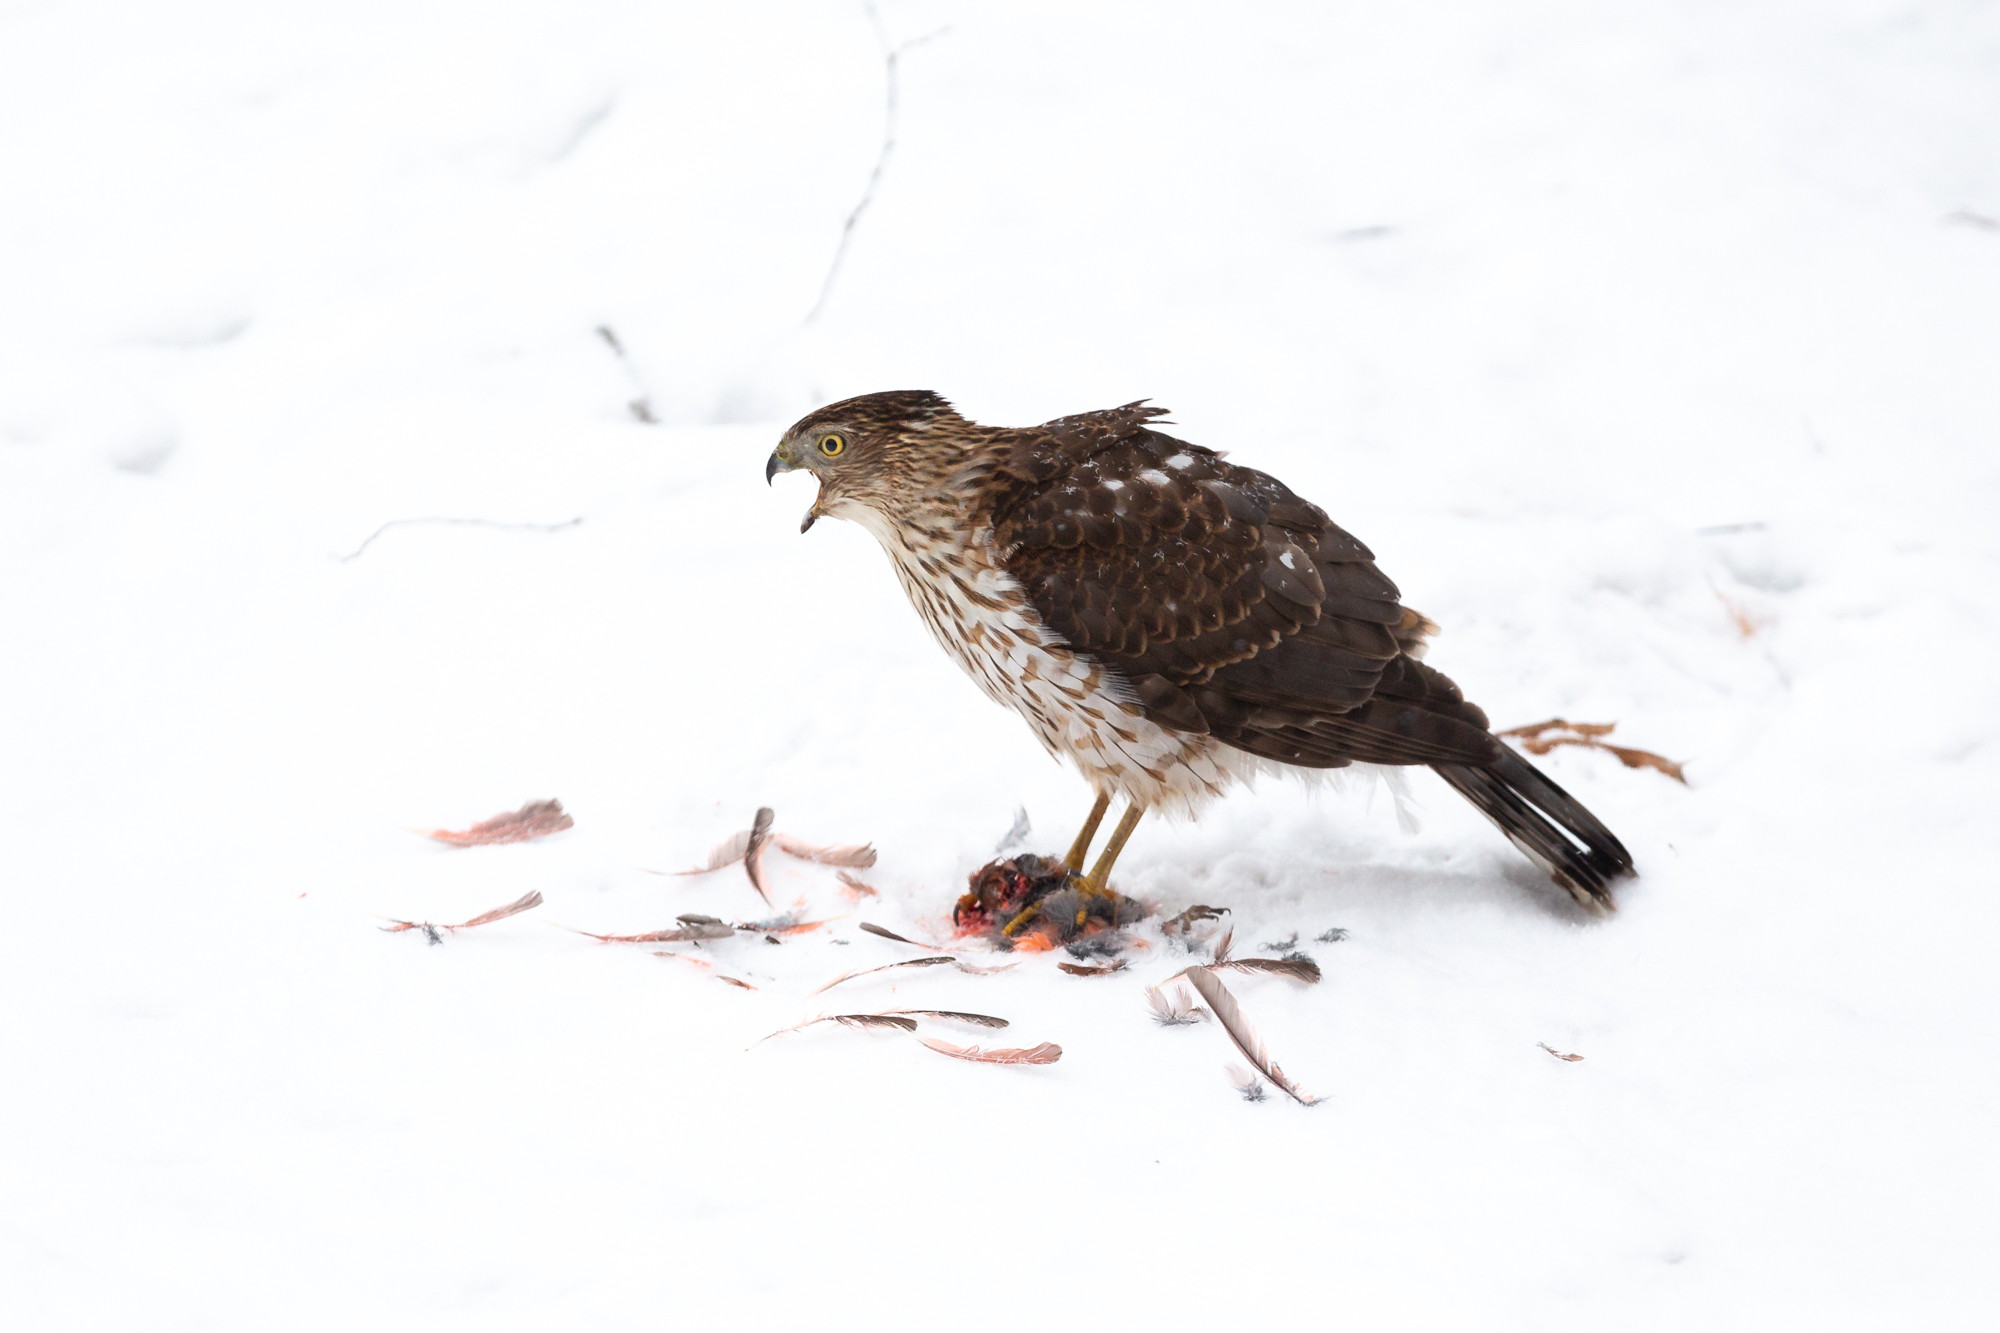 A Coopers Hawk picking at the remains of a Northern Cardinal